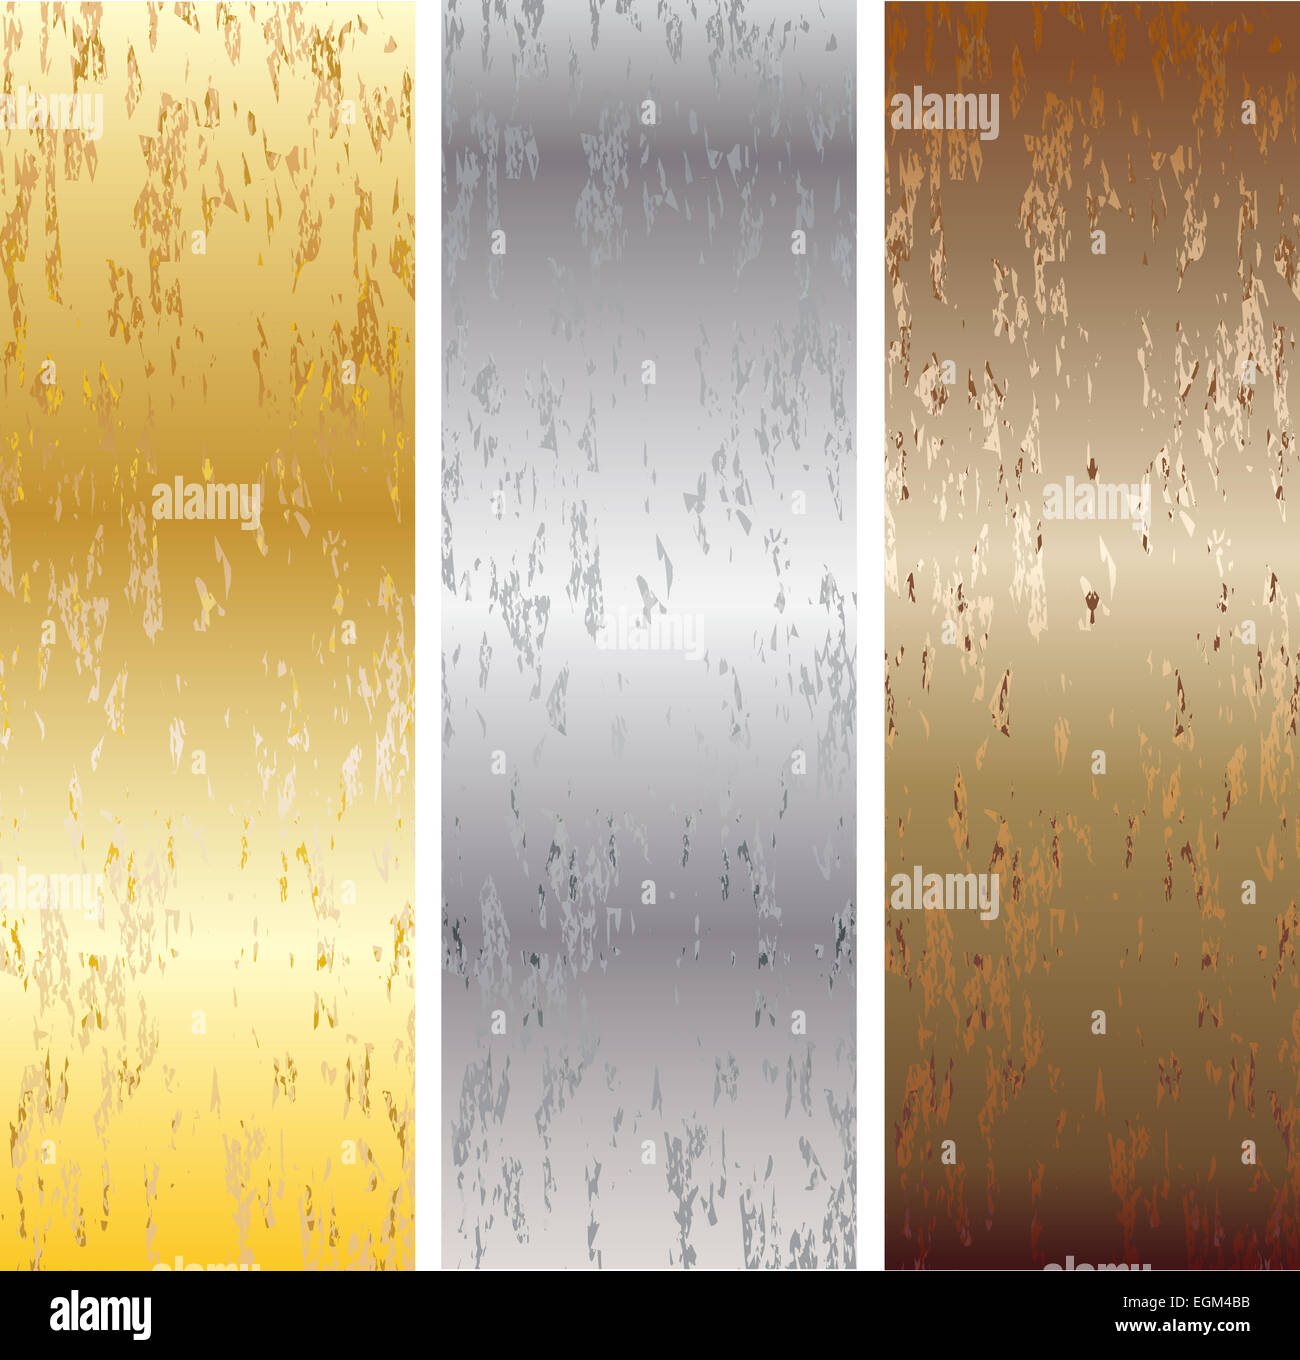 Aluminum, bronze and brass stitched textures Stock Photo